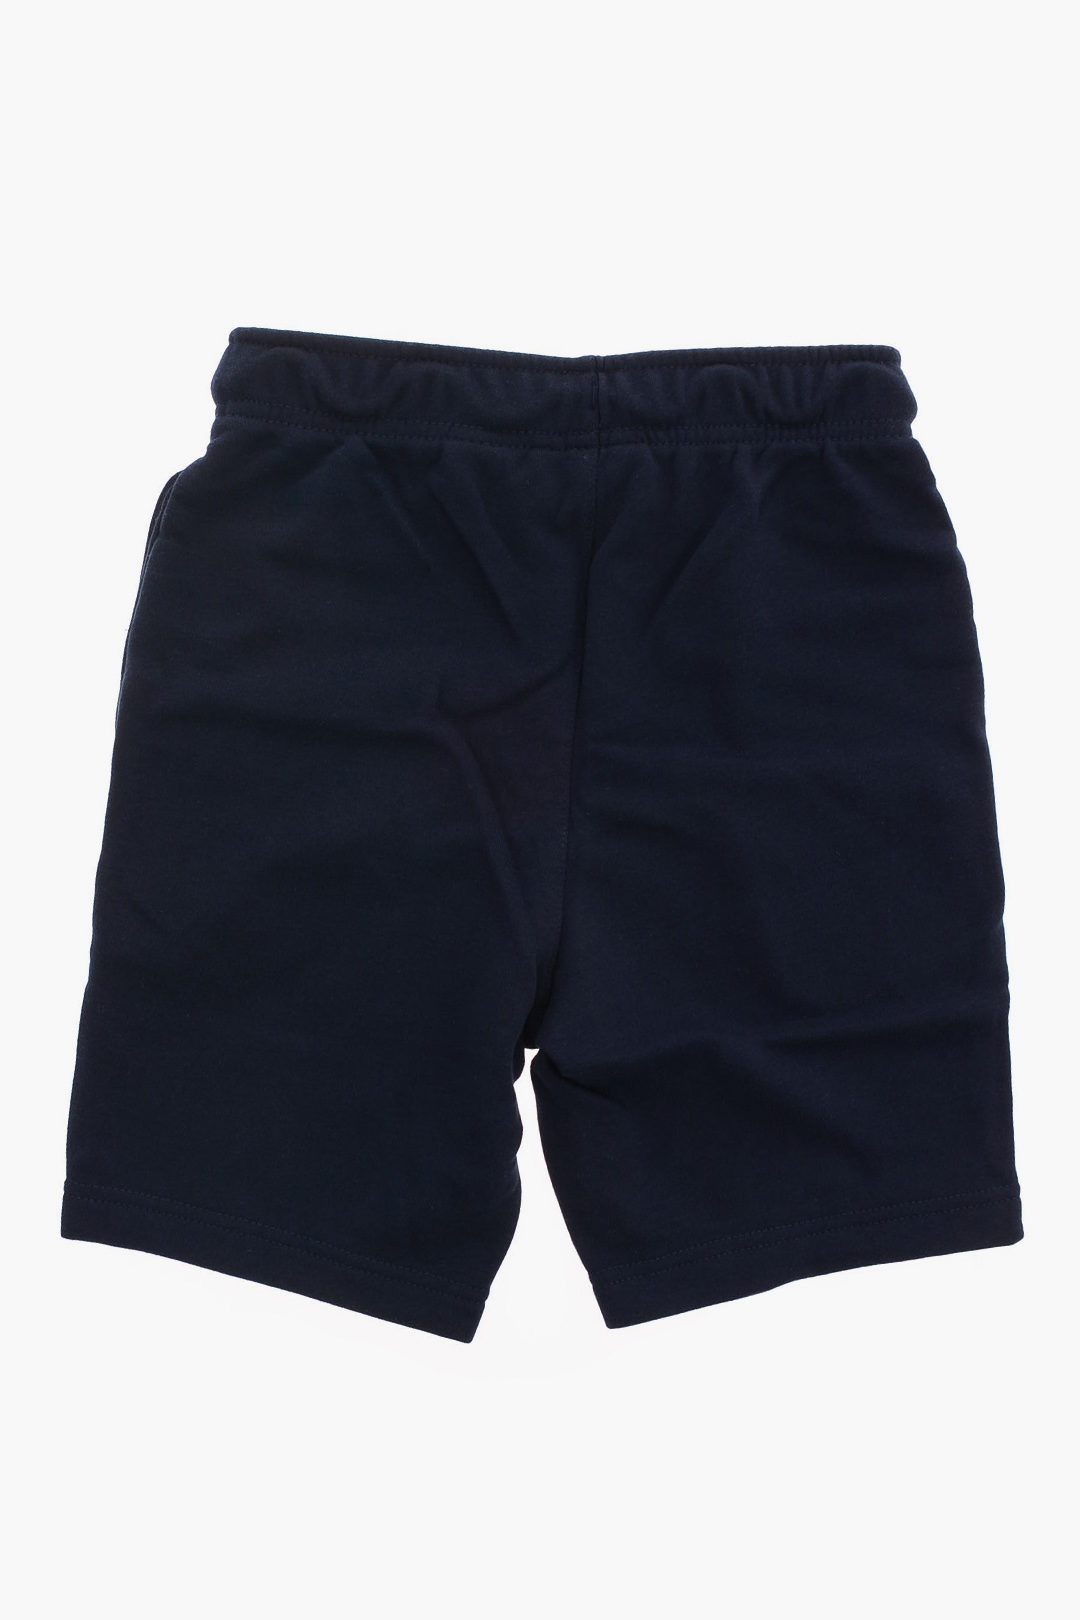 sweat shorts for kids